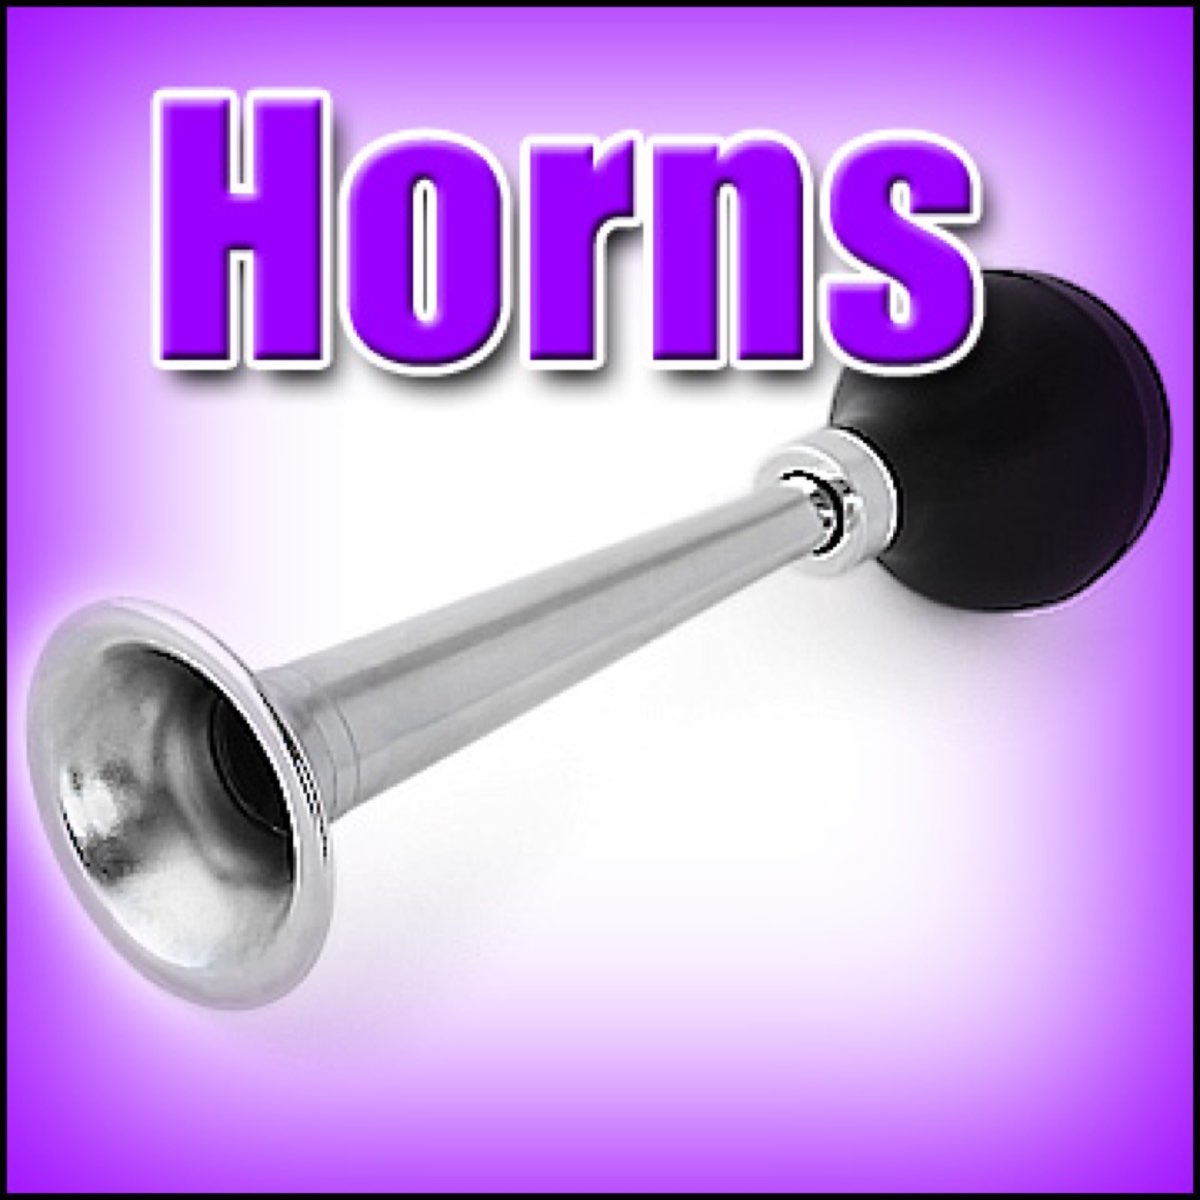 Horns: Sound Effects by Sound Effects Library on Apple Music